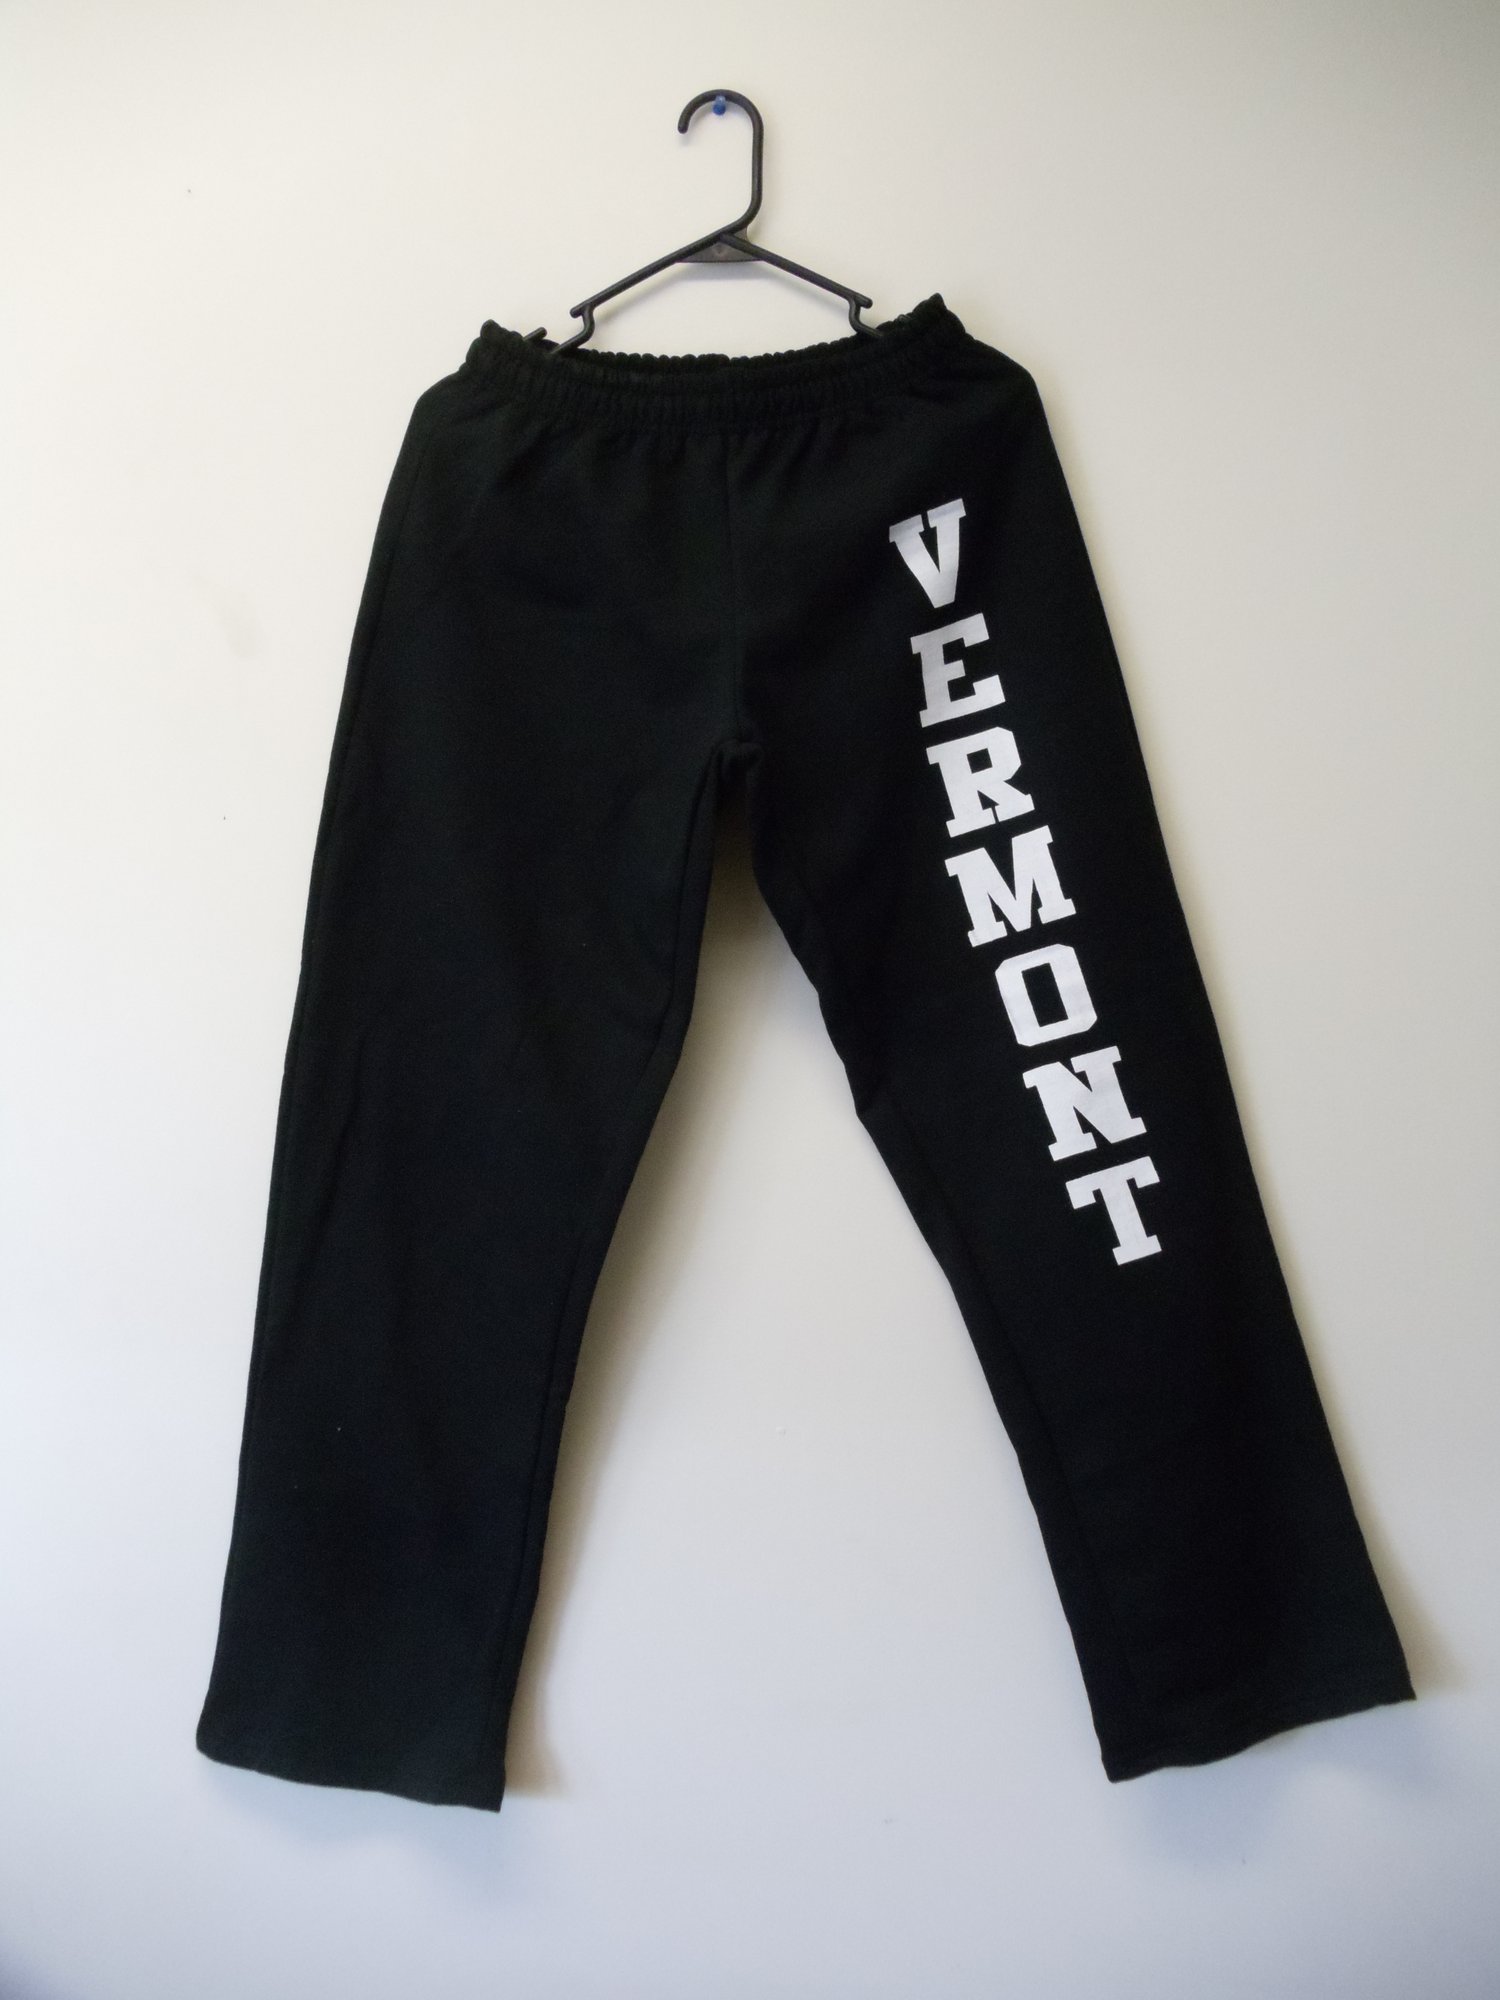 Image of Adult & Kids Vermont 8oz. Sweatpants - Black with white Vermont on Leg